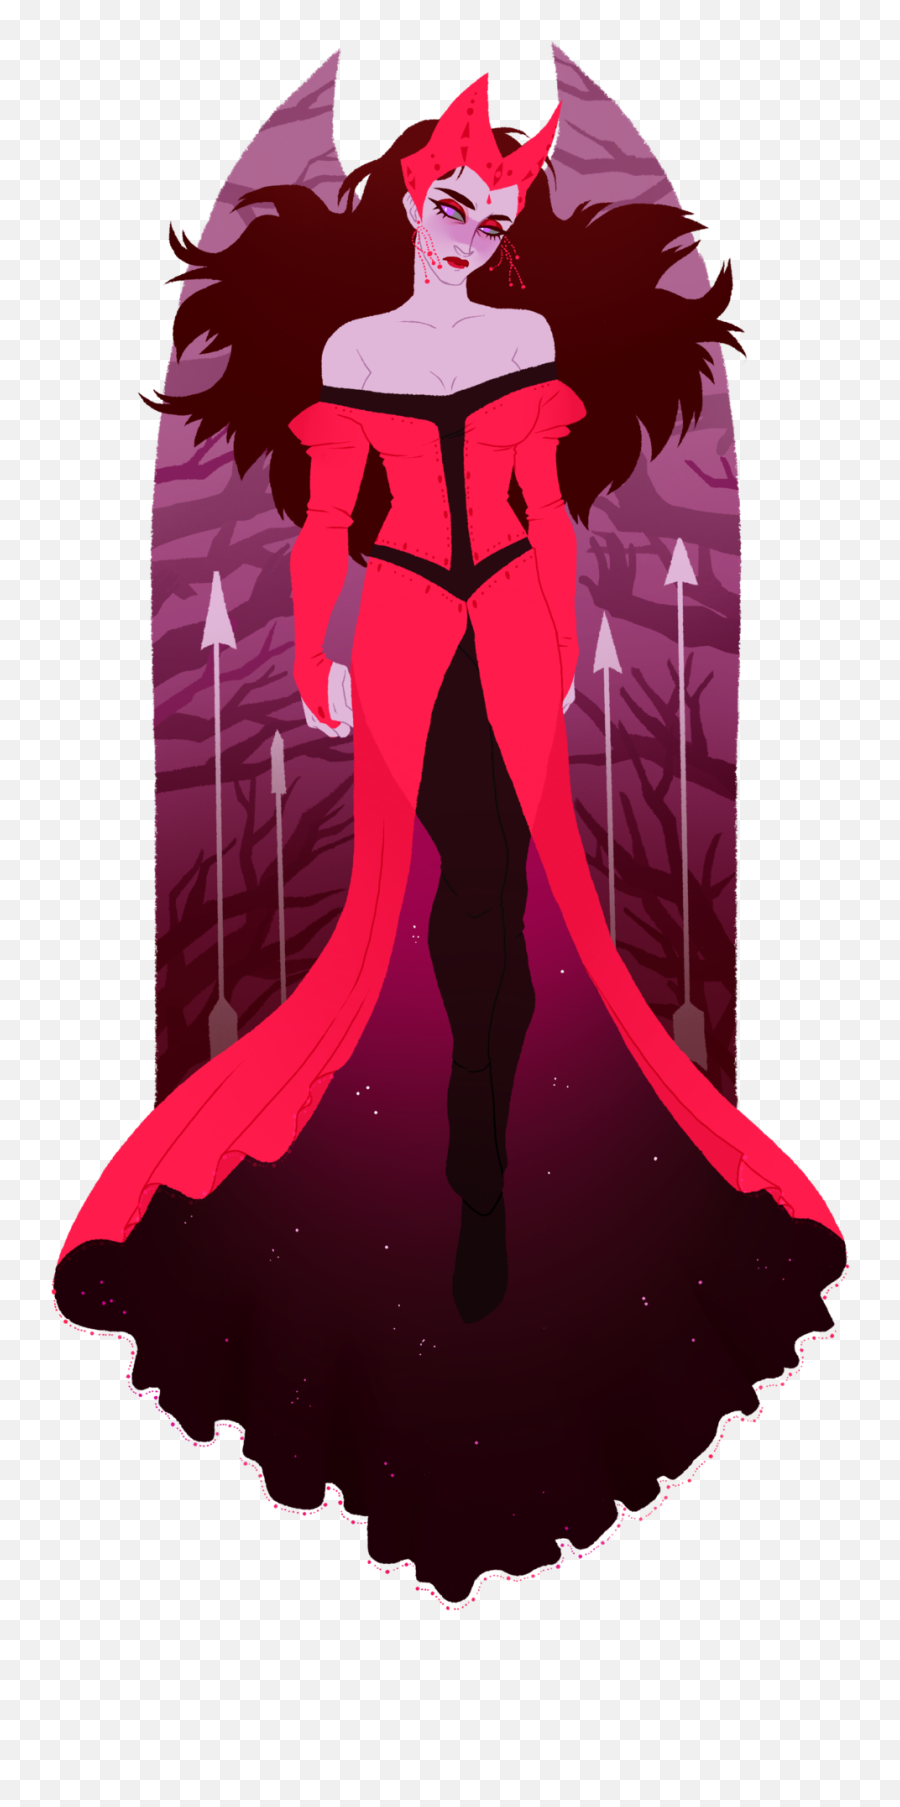 Wanda Maximoff Scarlet Witch Marvel Comics Comicswanda - All Marvel Comic Scarlet Witch Png,Scarlet Witch Transparent